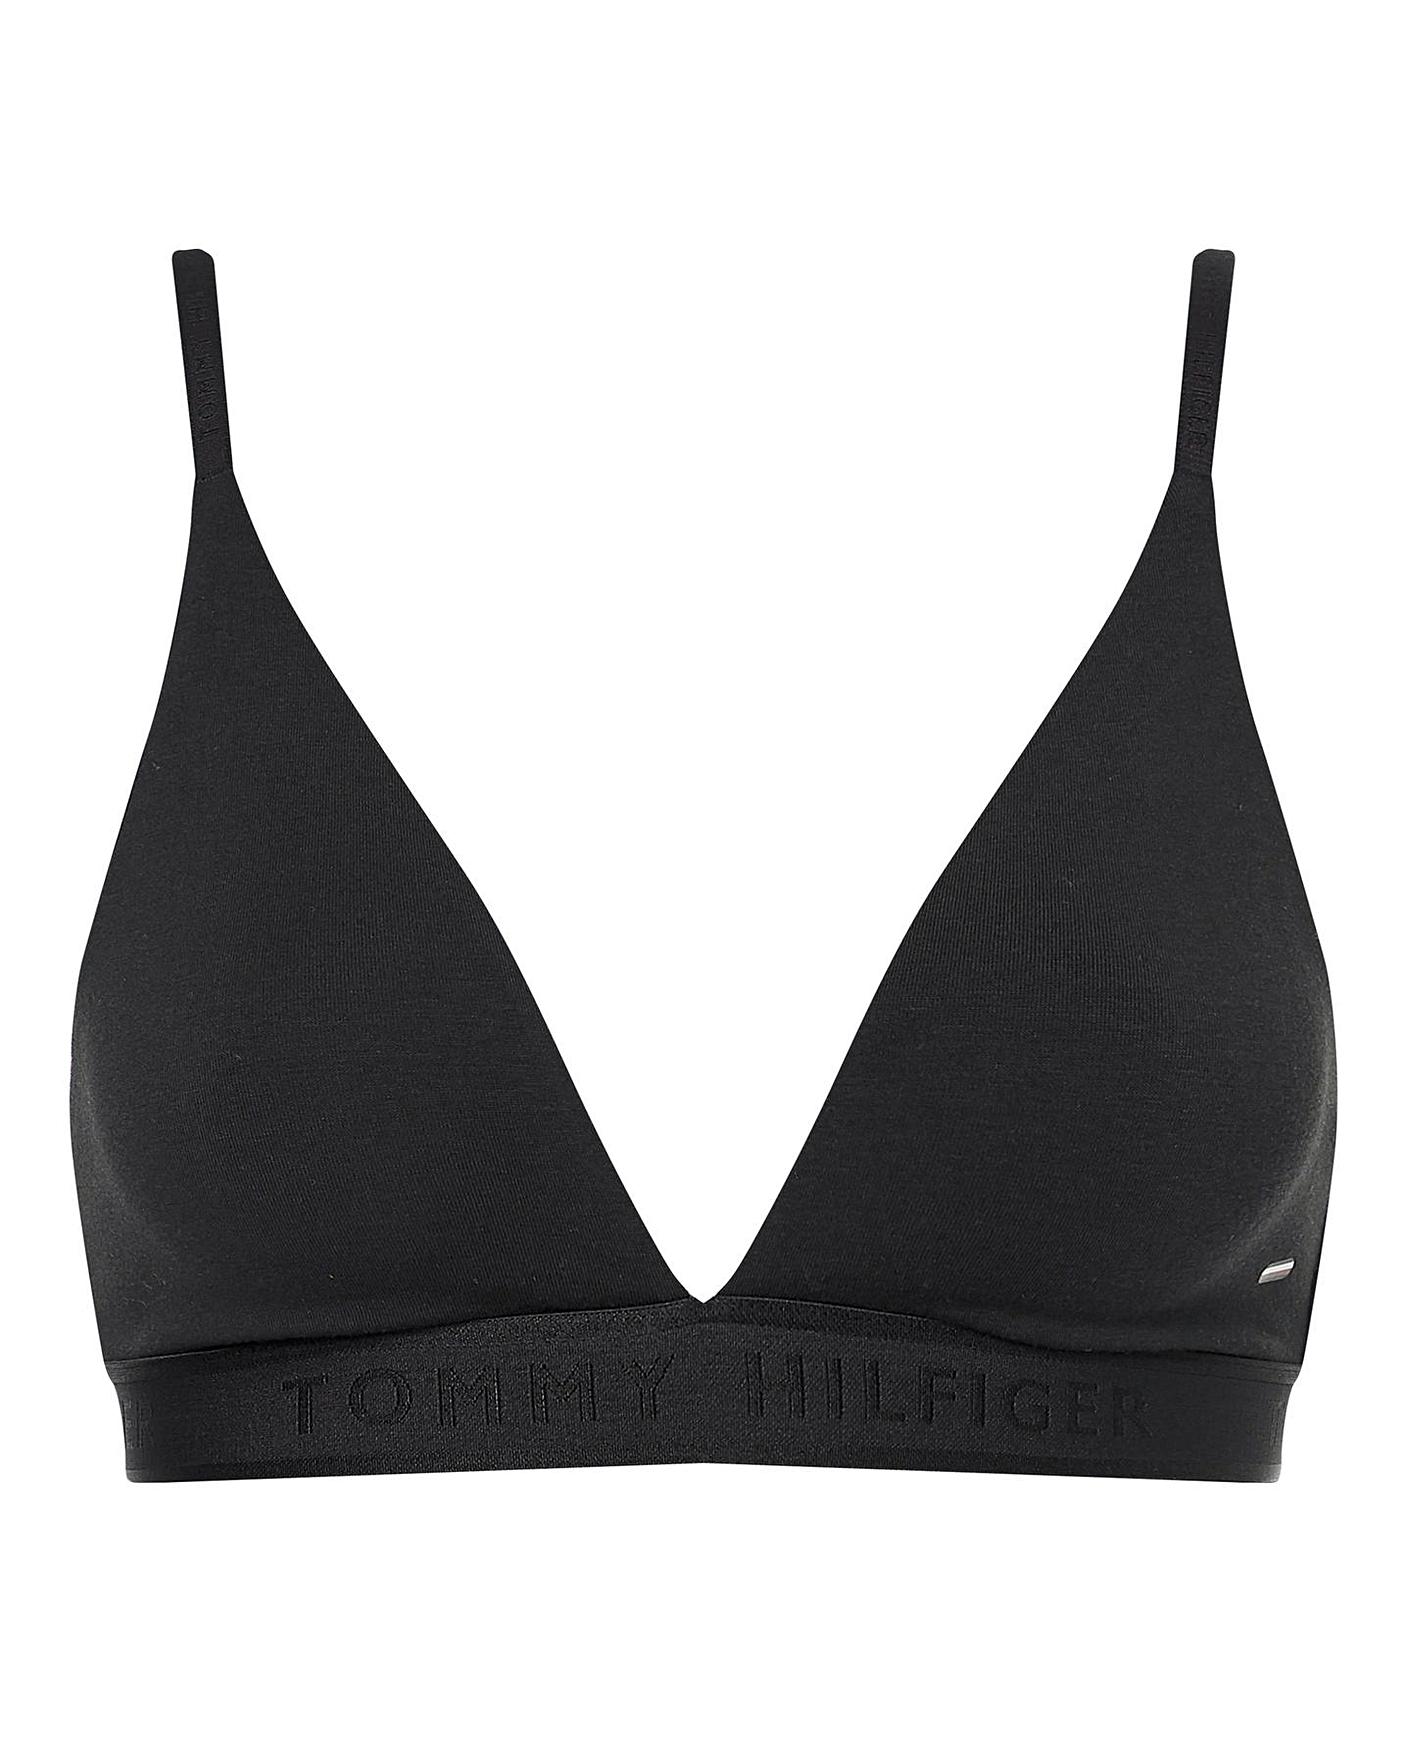 Tommy Hilfiger Seacell Triangle Bralet